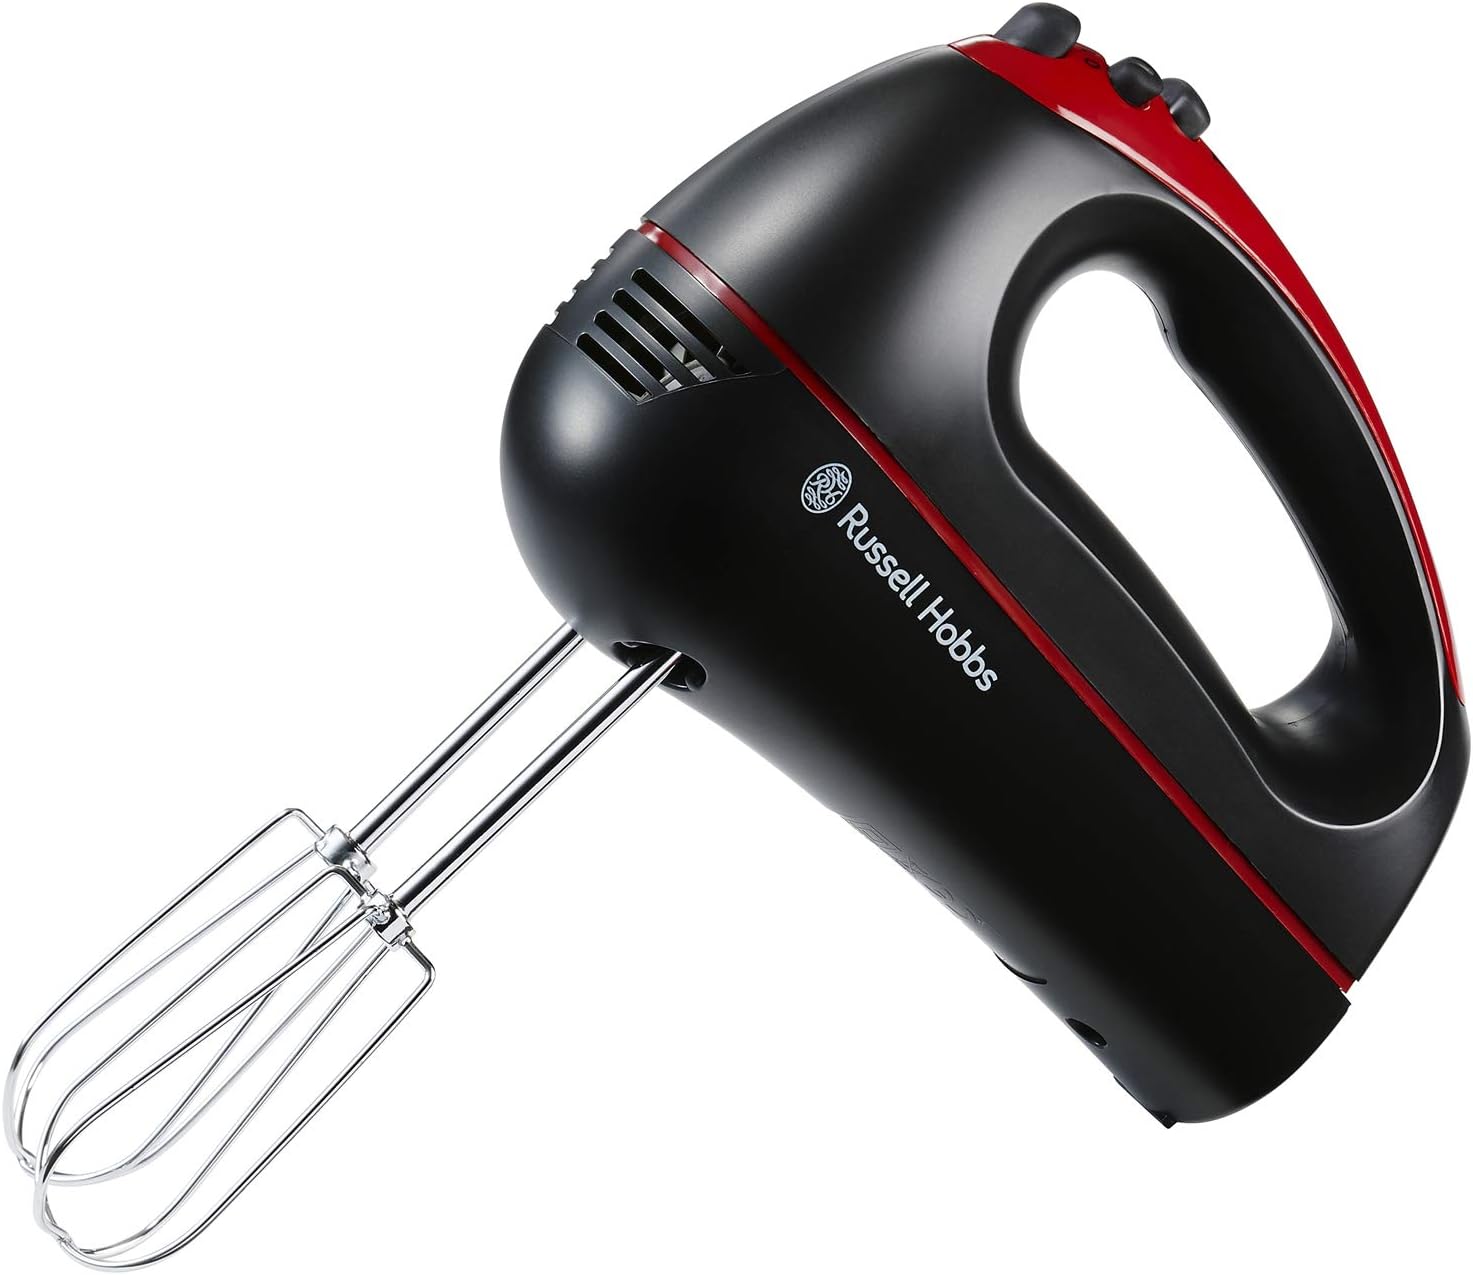 Russell Hobbs Desire Electric Hand Mixer with 5 speeds & turbo setting, 2 chrome plated beaters & 2 chrome plated dough hooks inc, all dishwasher safe, Easy release button, 350W, 24672 - Amazing Gadgets Outlet